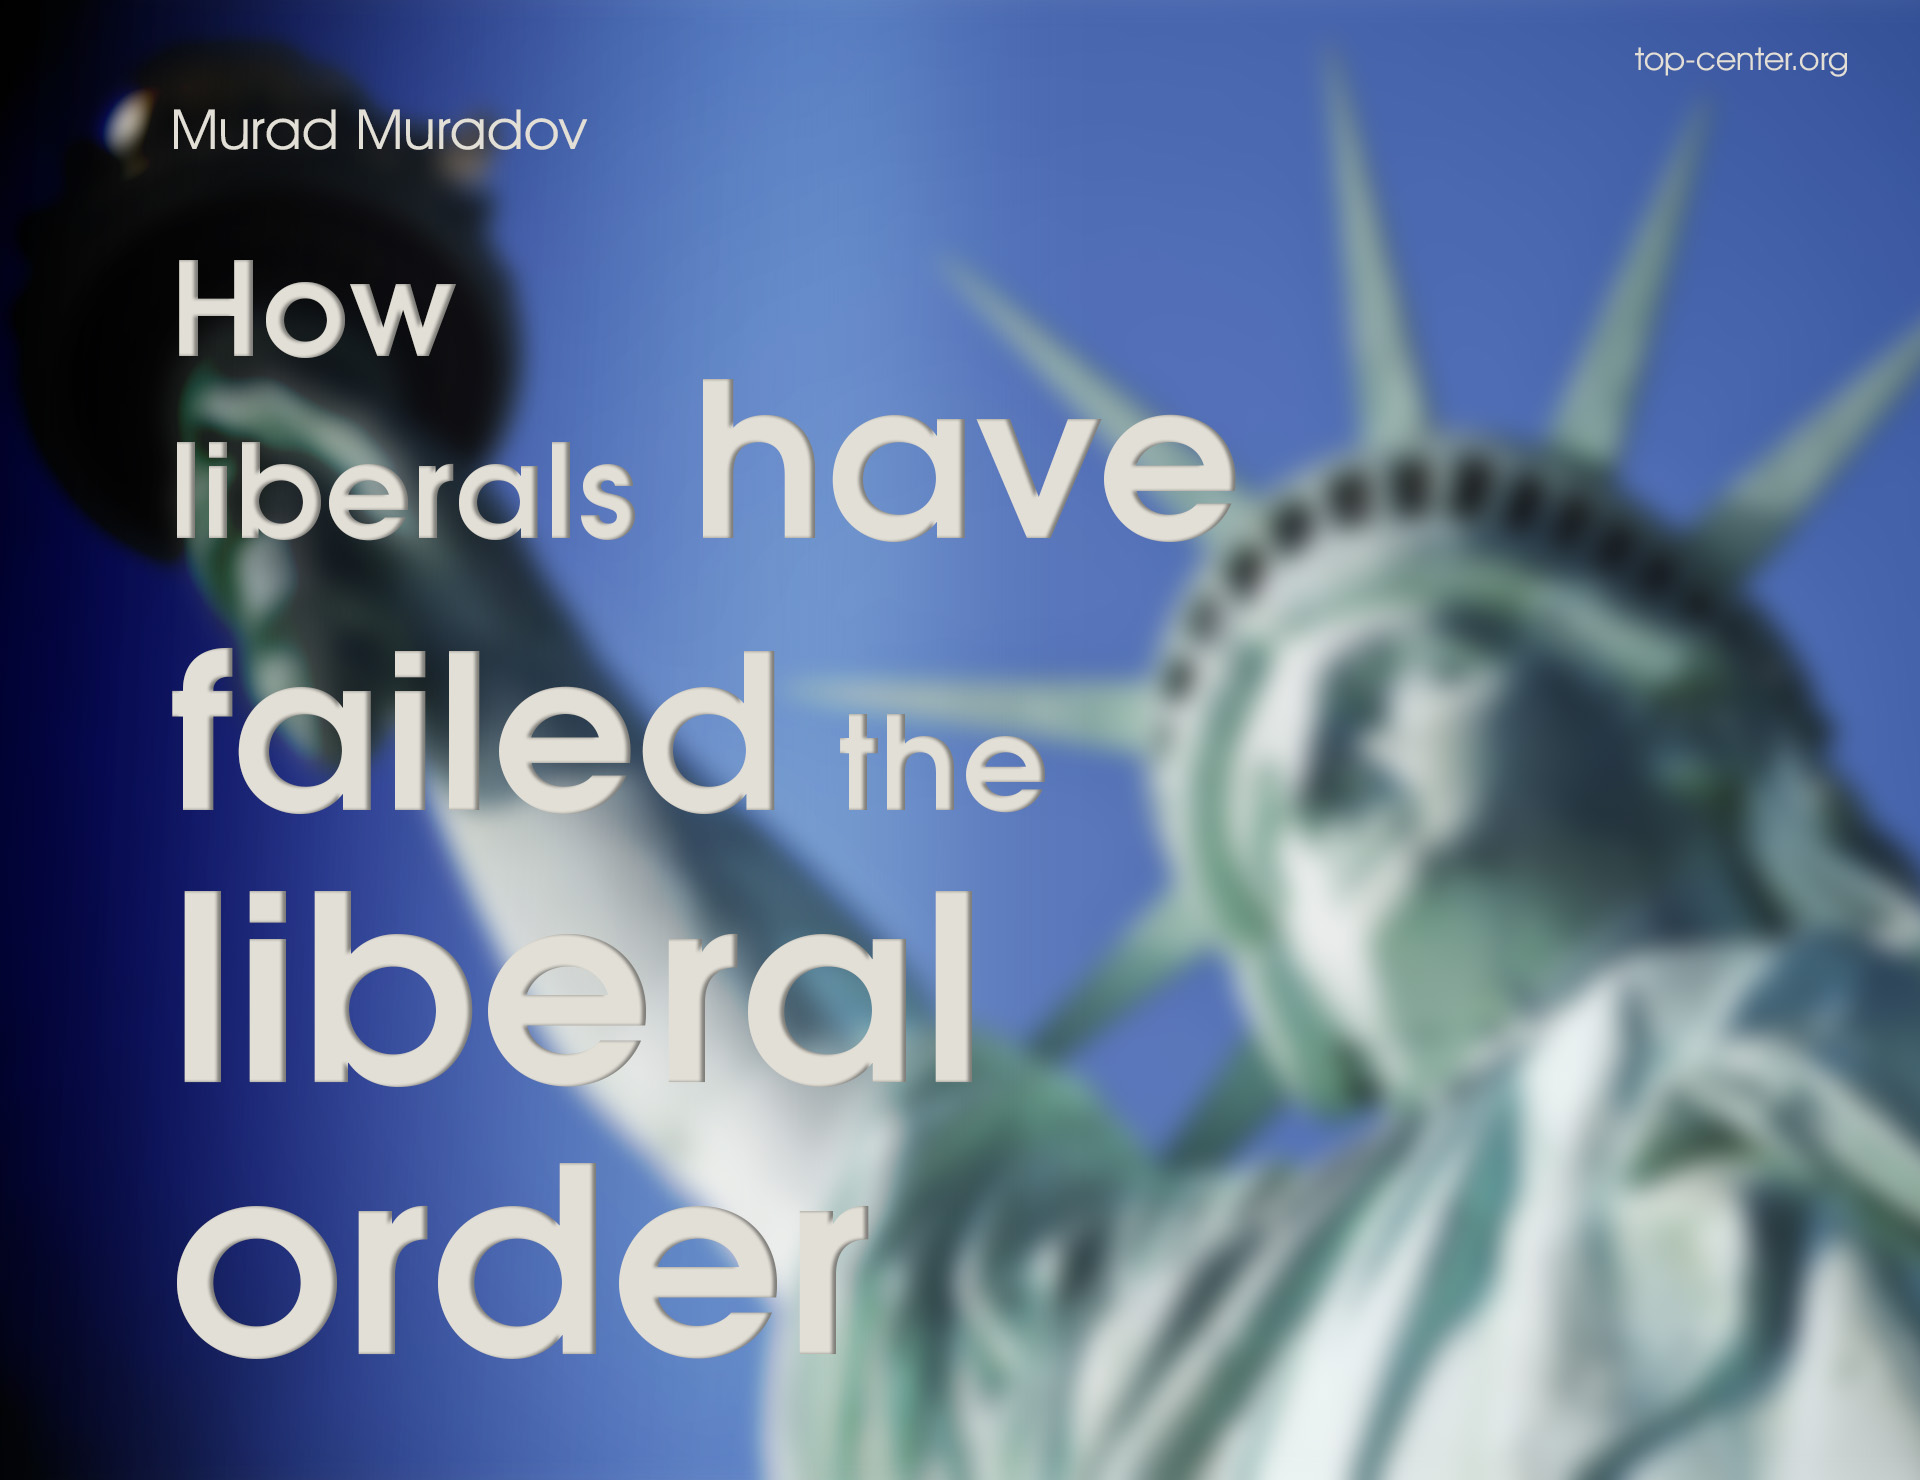 How liberals have failed the liberal order